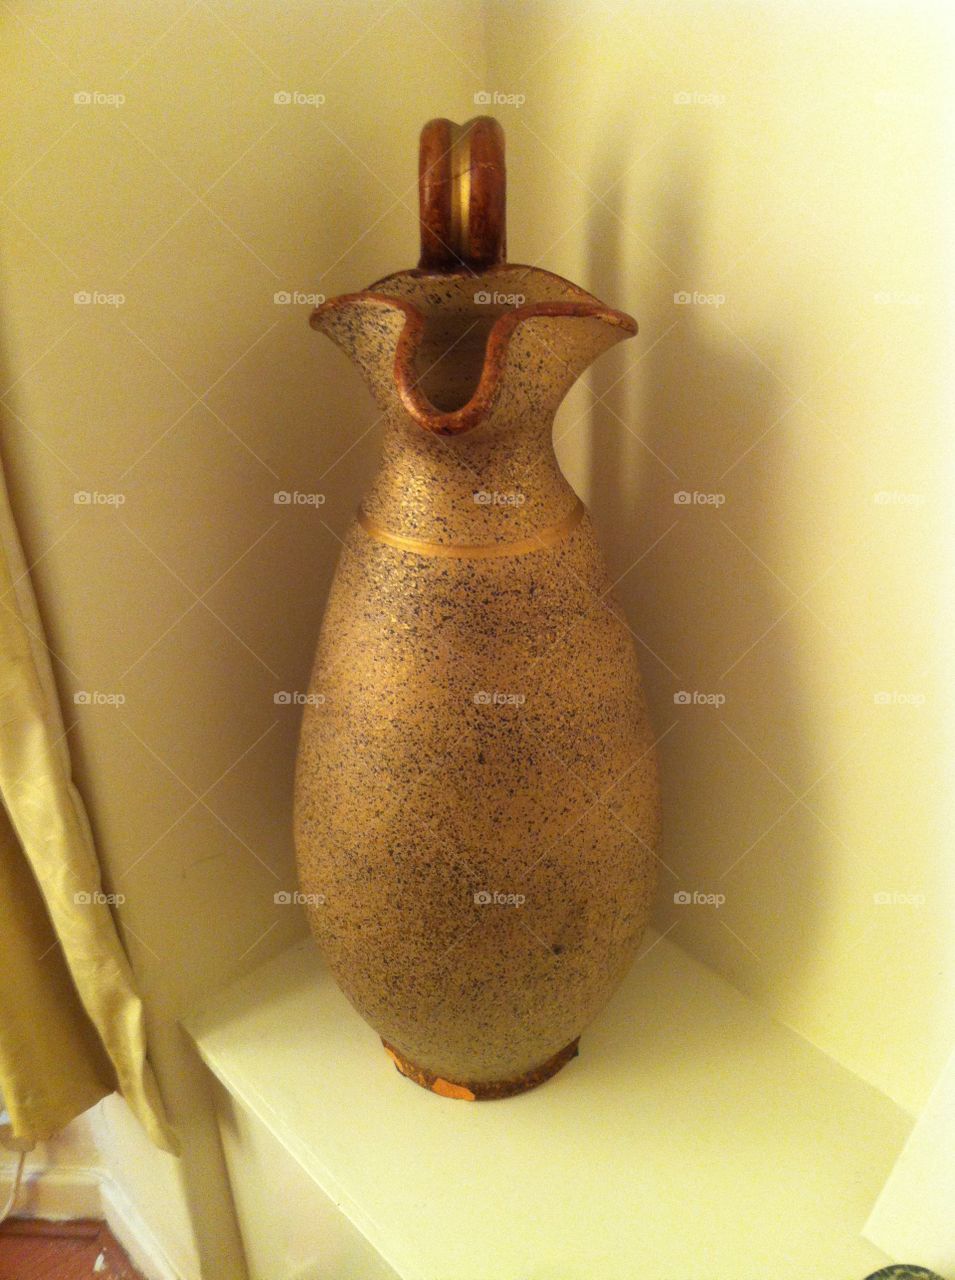 Gold flecked Jug. A jug I bought my mother as a present.